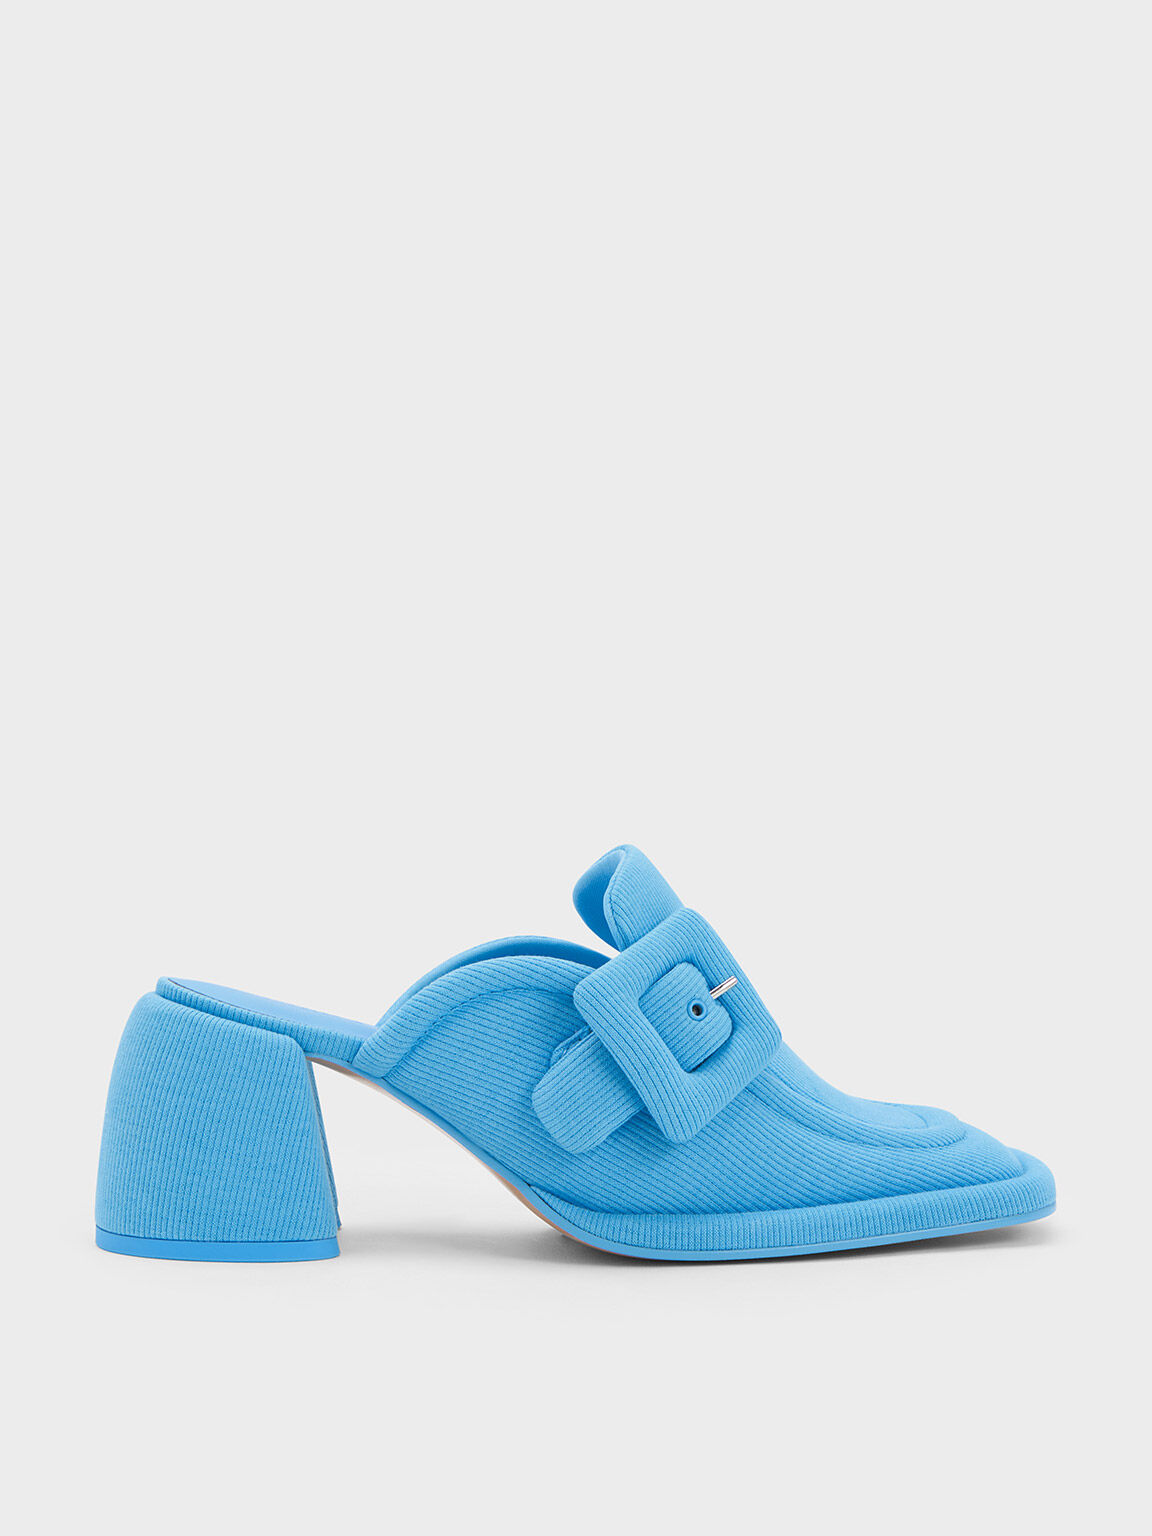 Woven Buckled Loafer Mules, Blue, hi-res